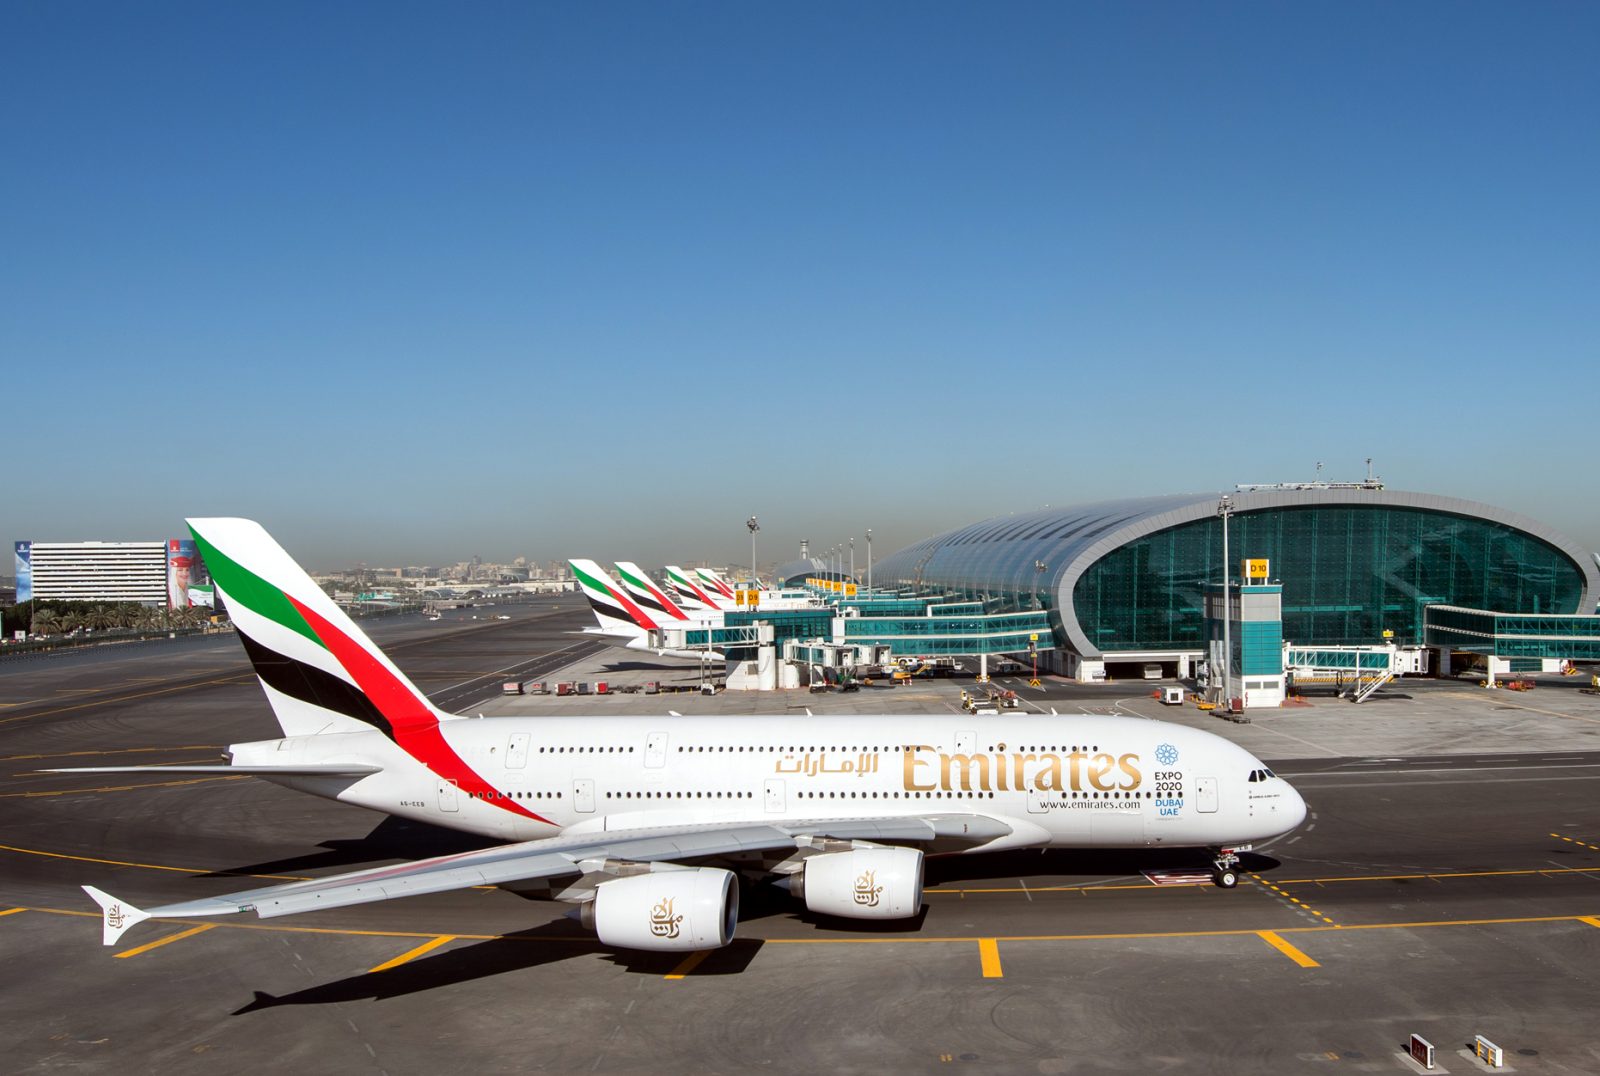 Whoah: Airbus Estimates Middle East Airlines Will More Than Double Their Aircraft Fleets by 2036